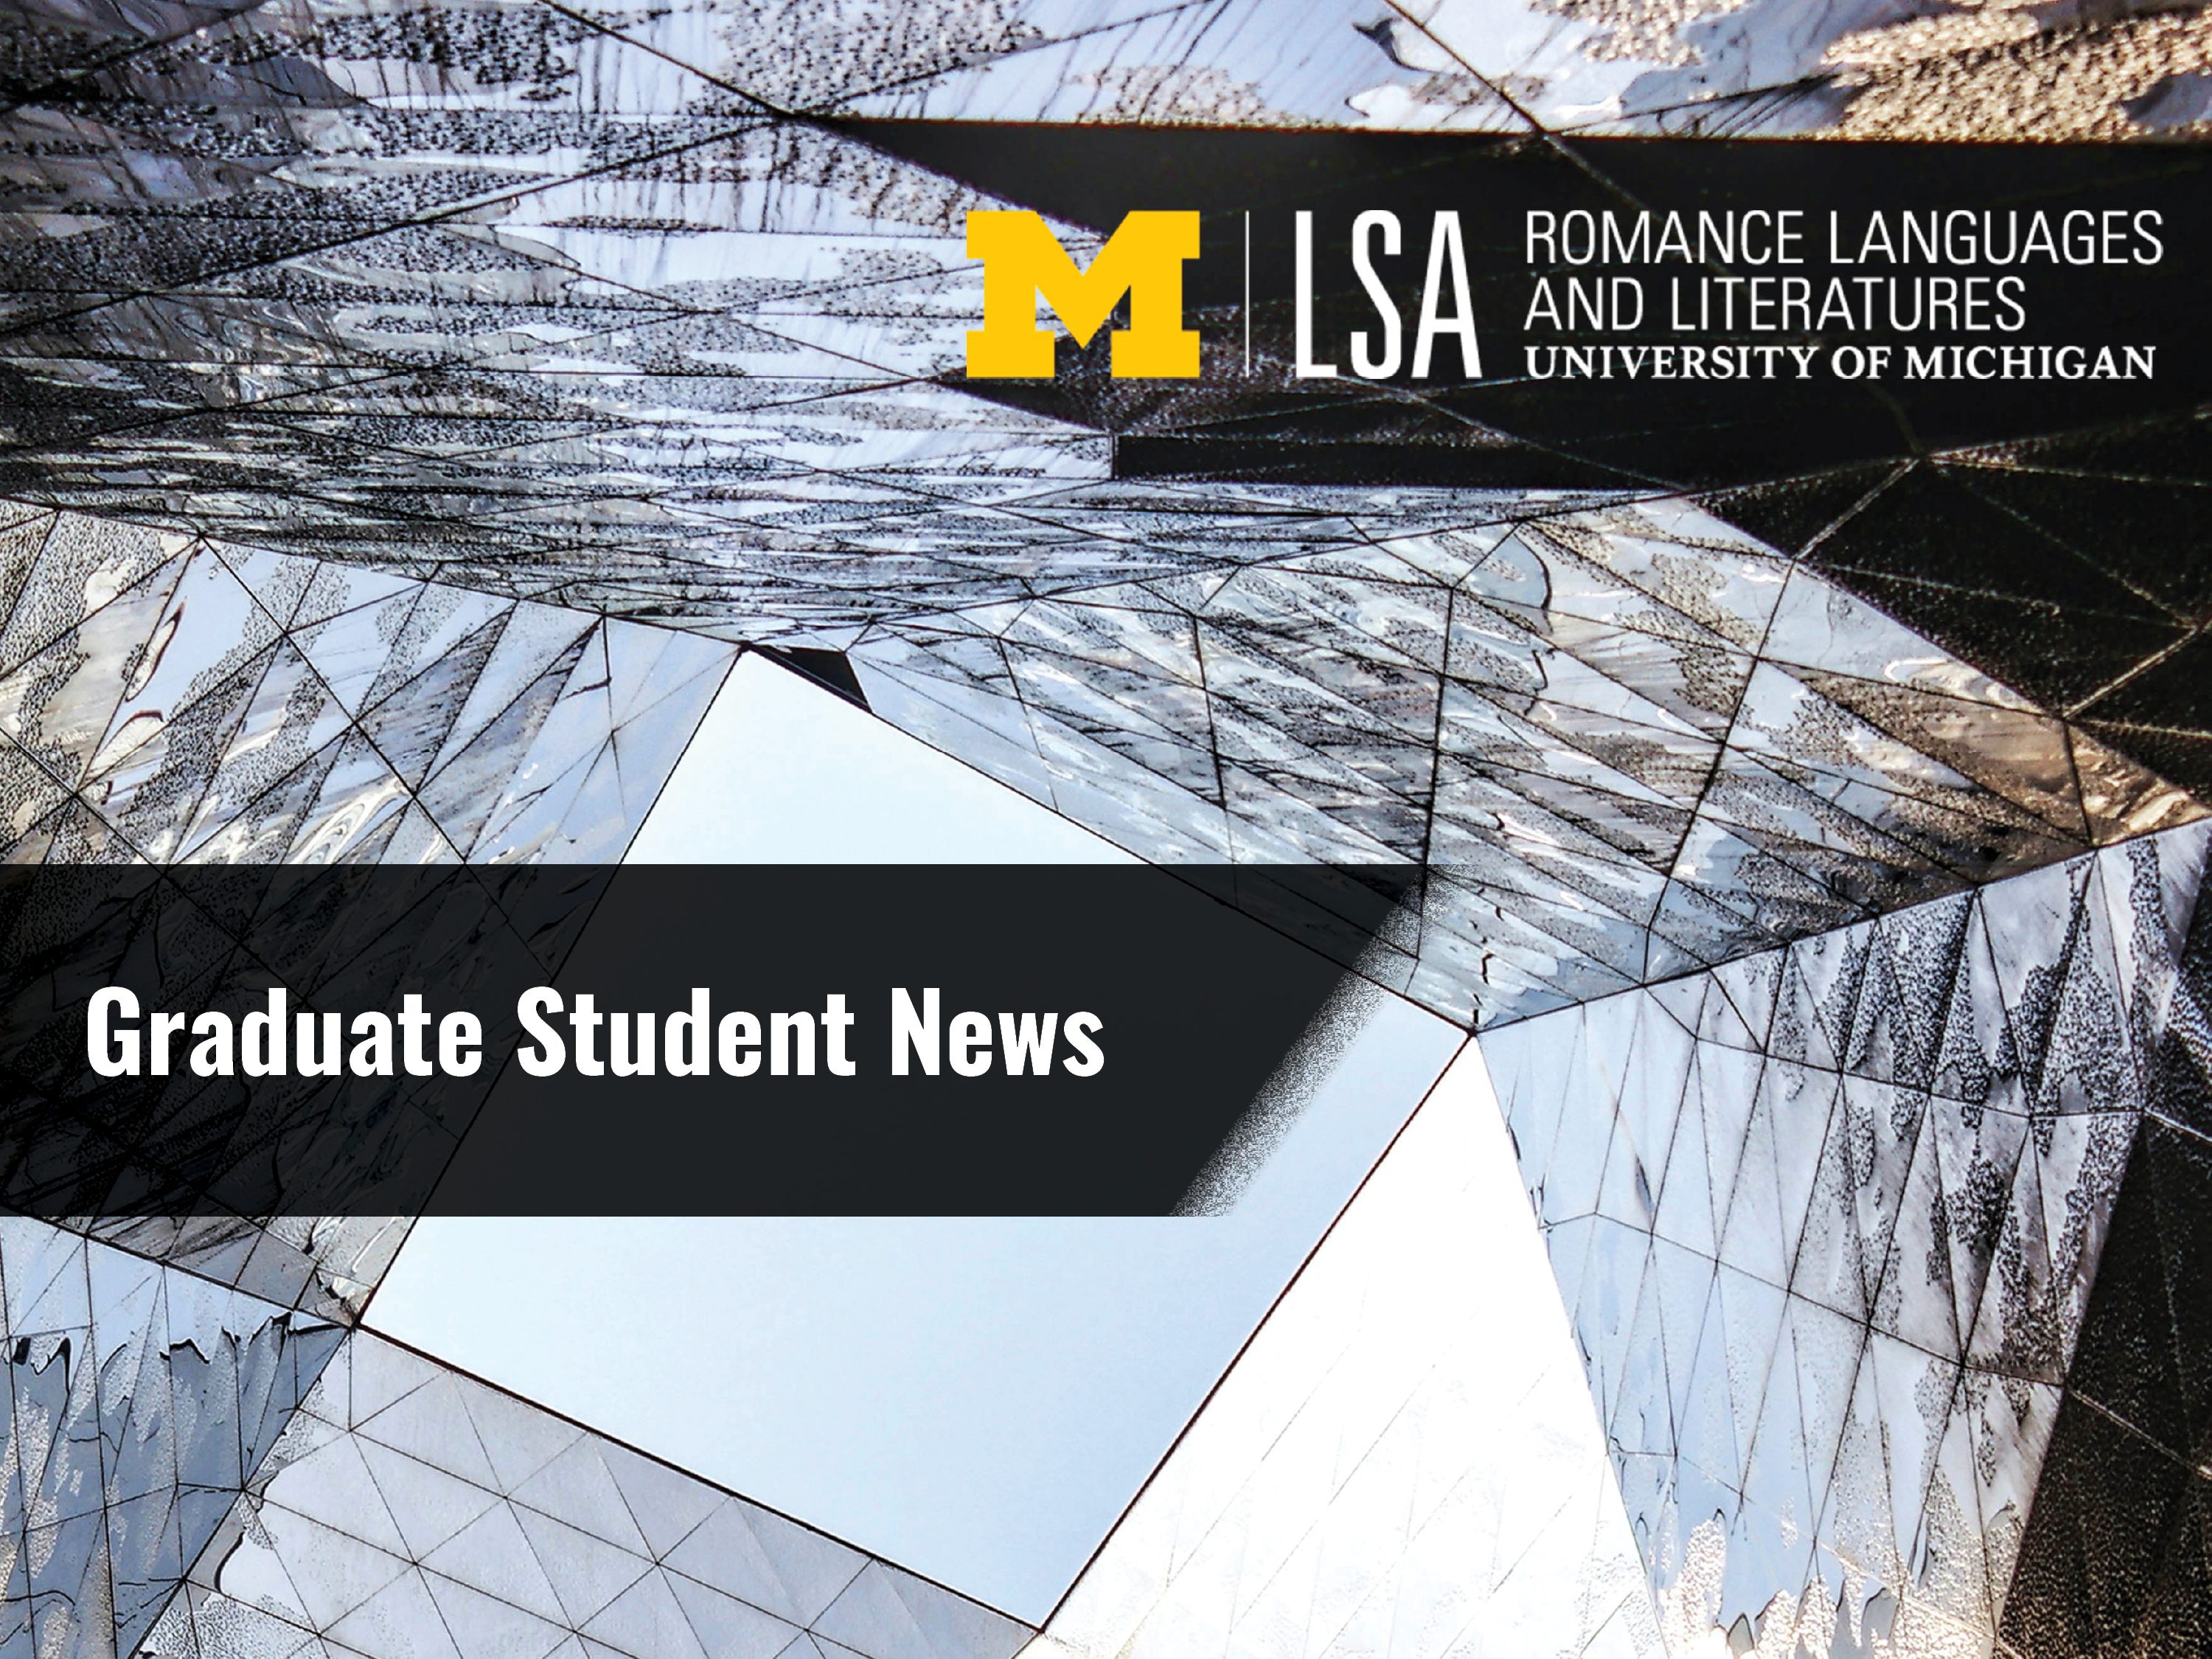 Abstract glass with the text, "Graduate Student News"